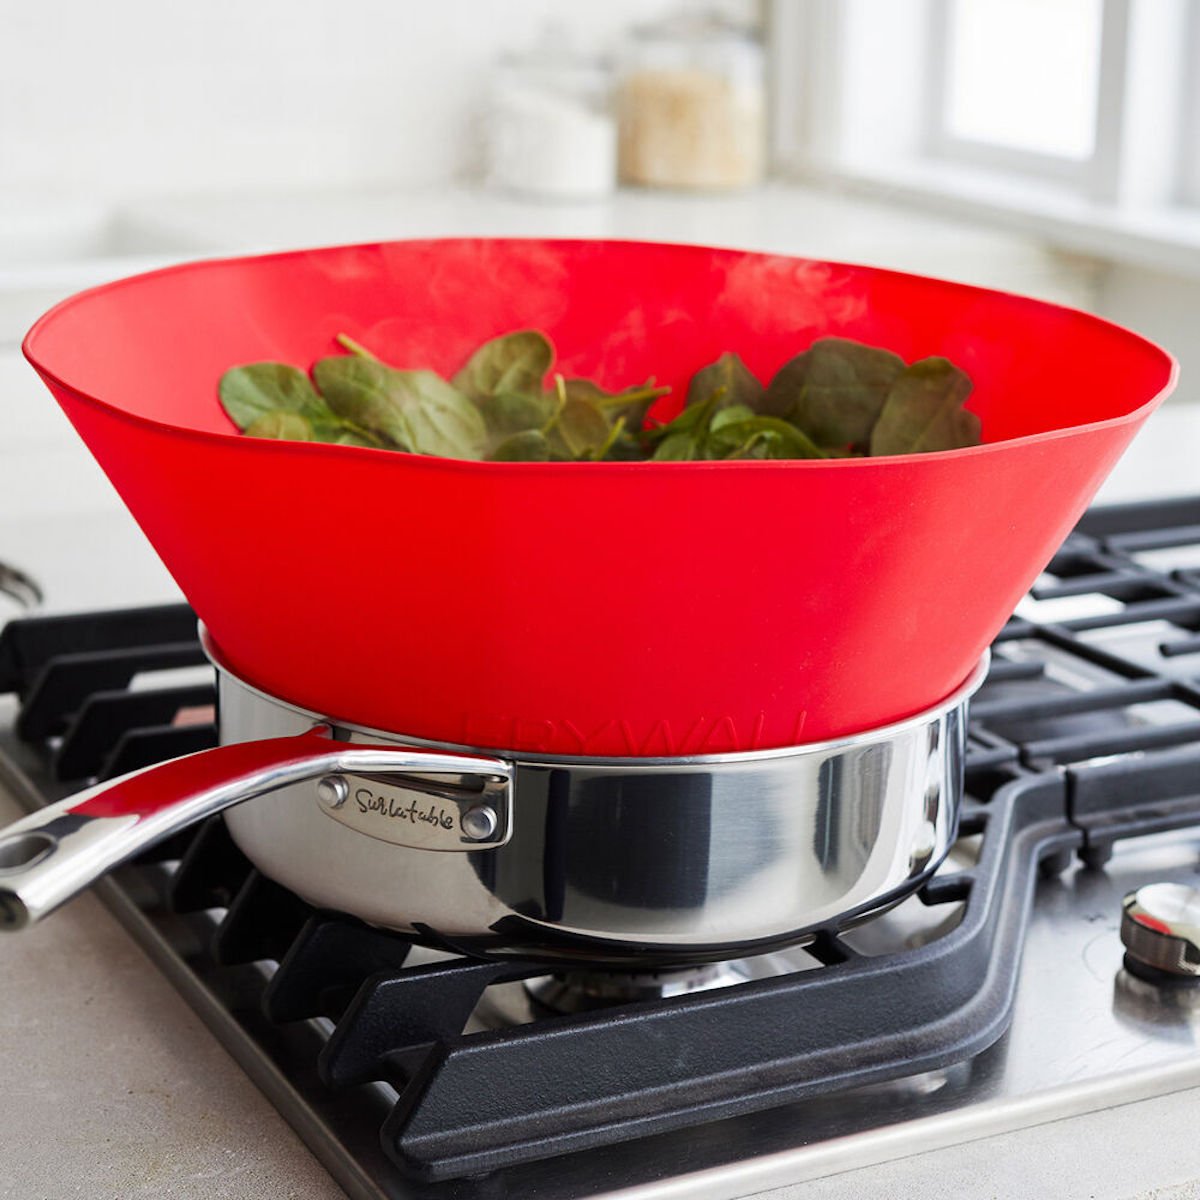 22 of the coolest kitchen gadgets we're loving right now